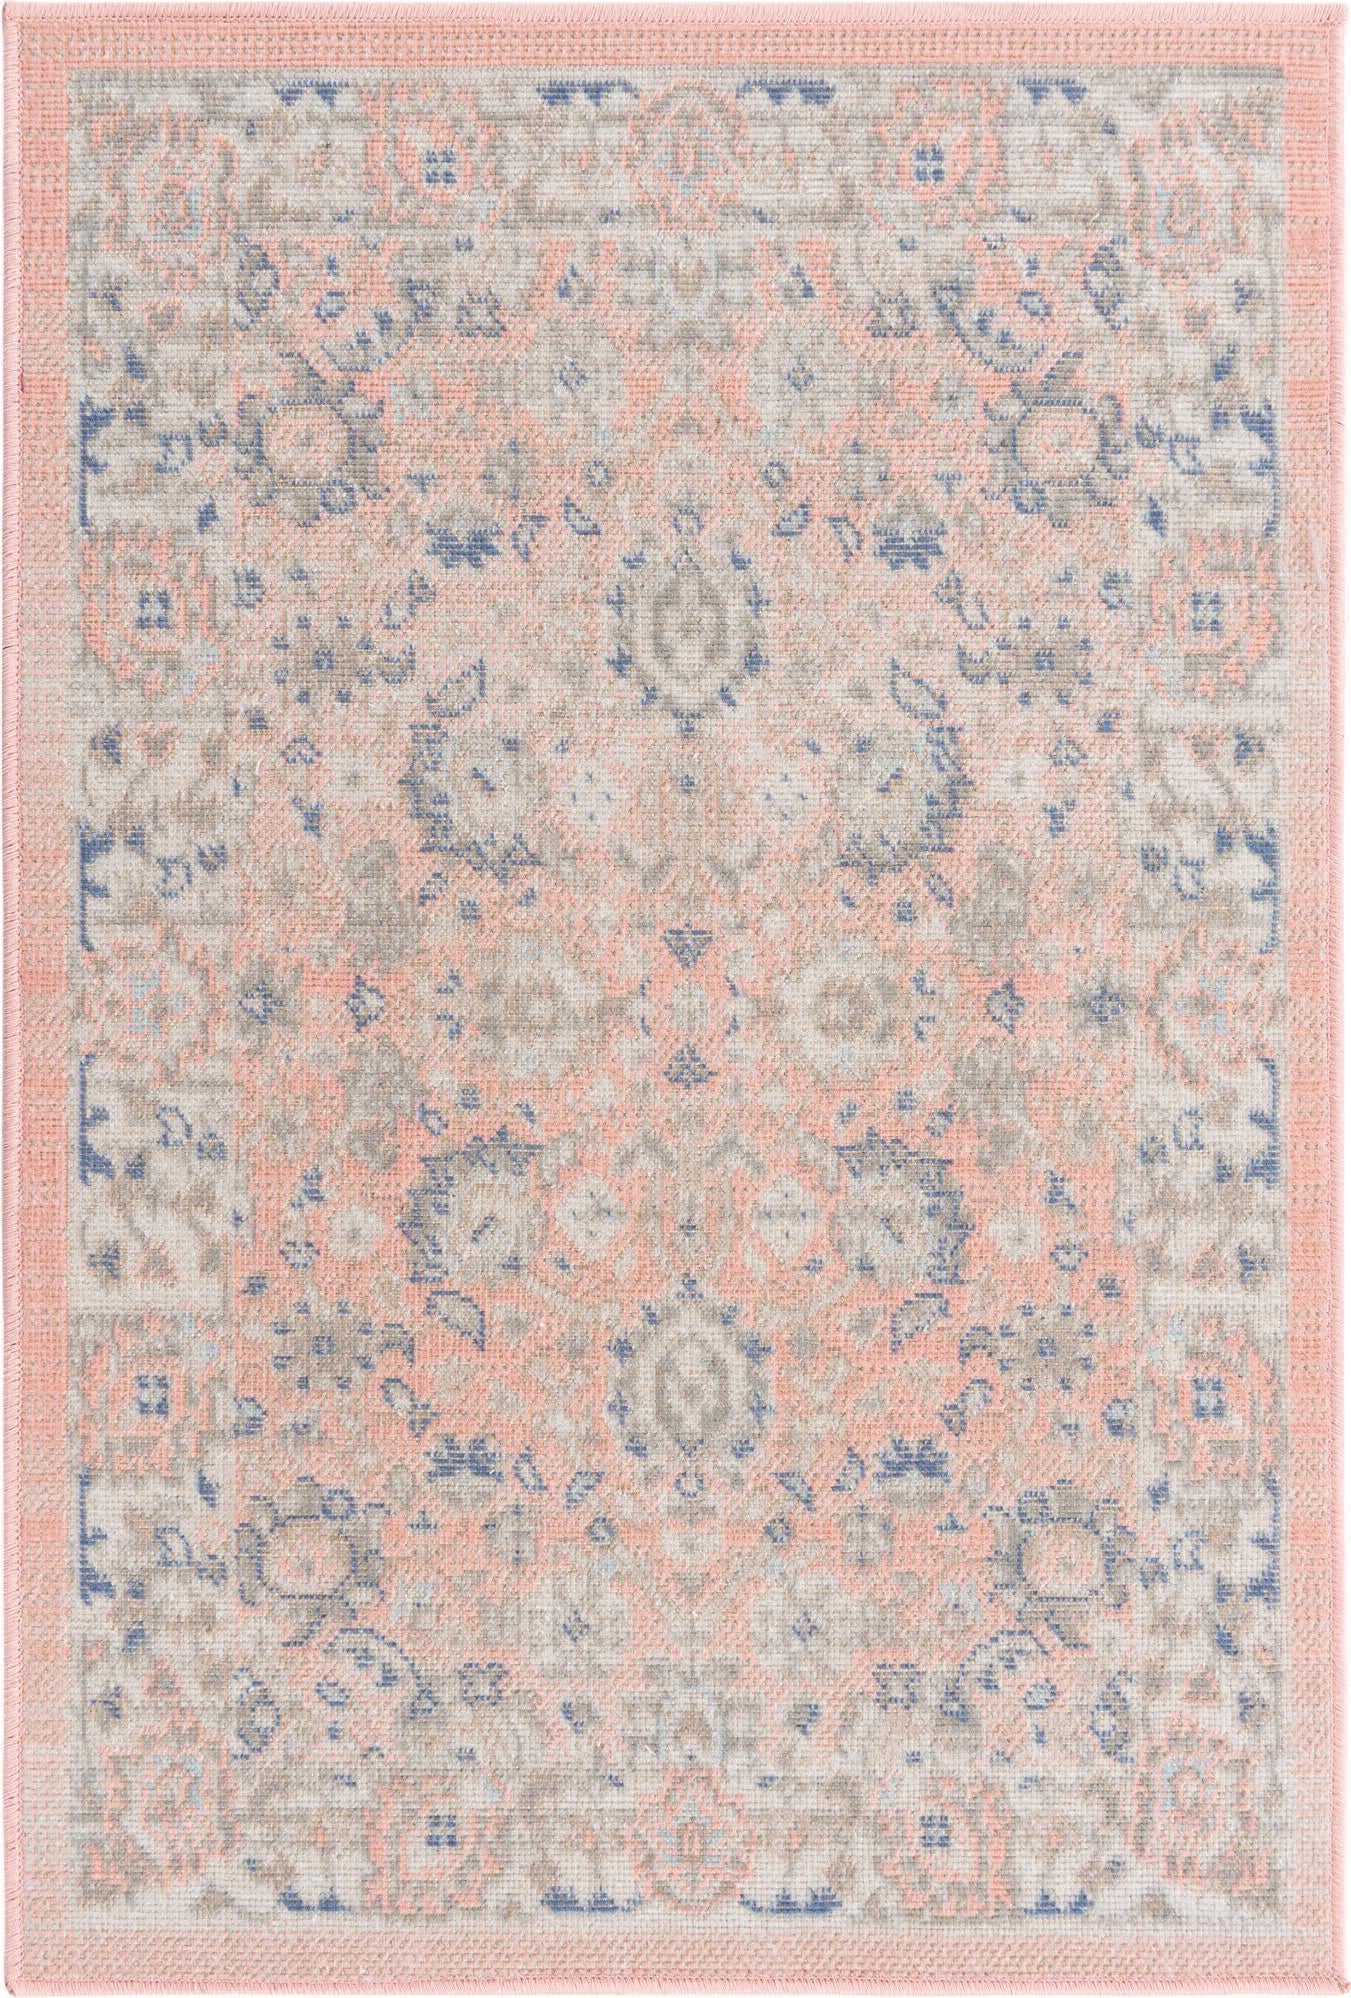 Unique Loom Whitney T-WHIT3 Powder Pink Area Rug main image